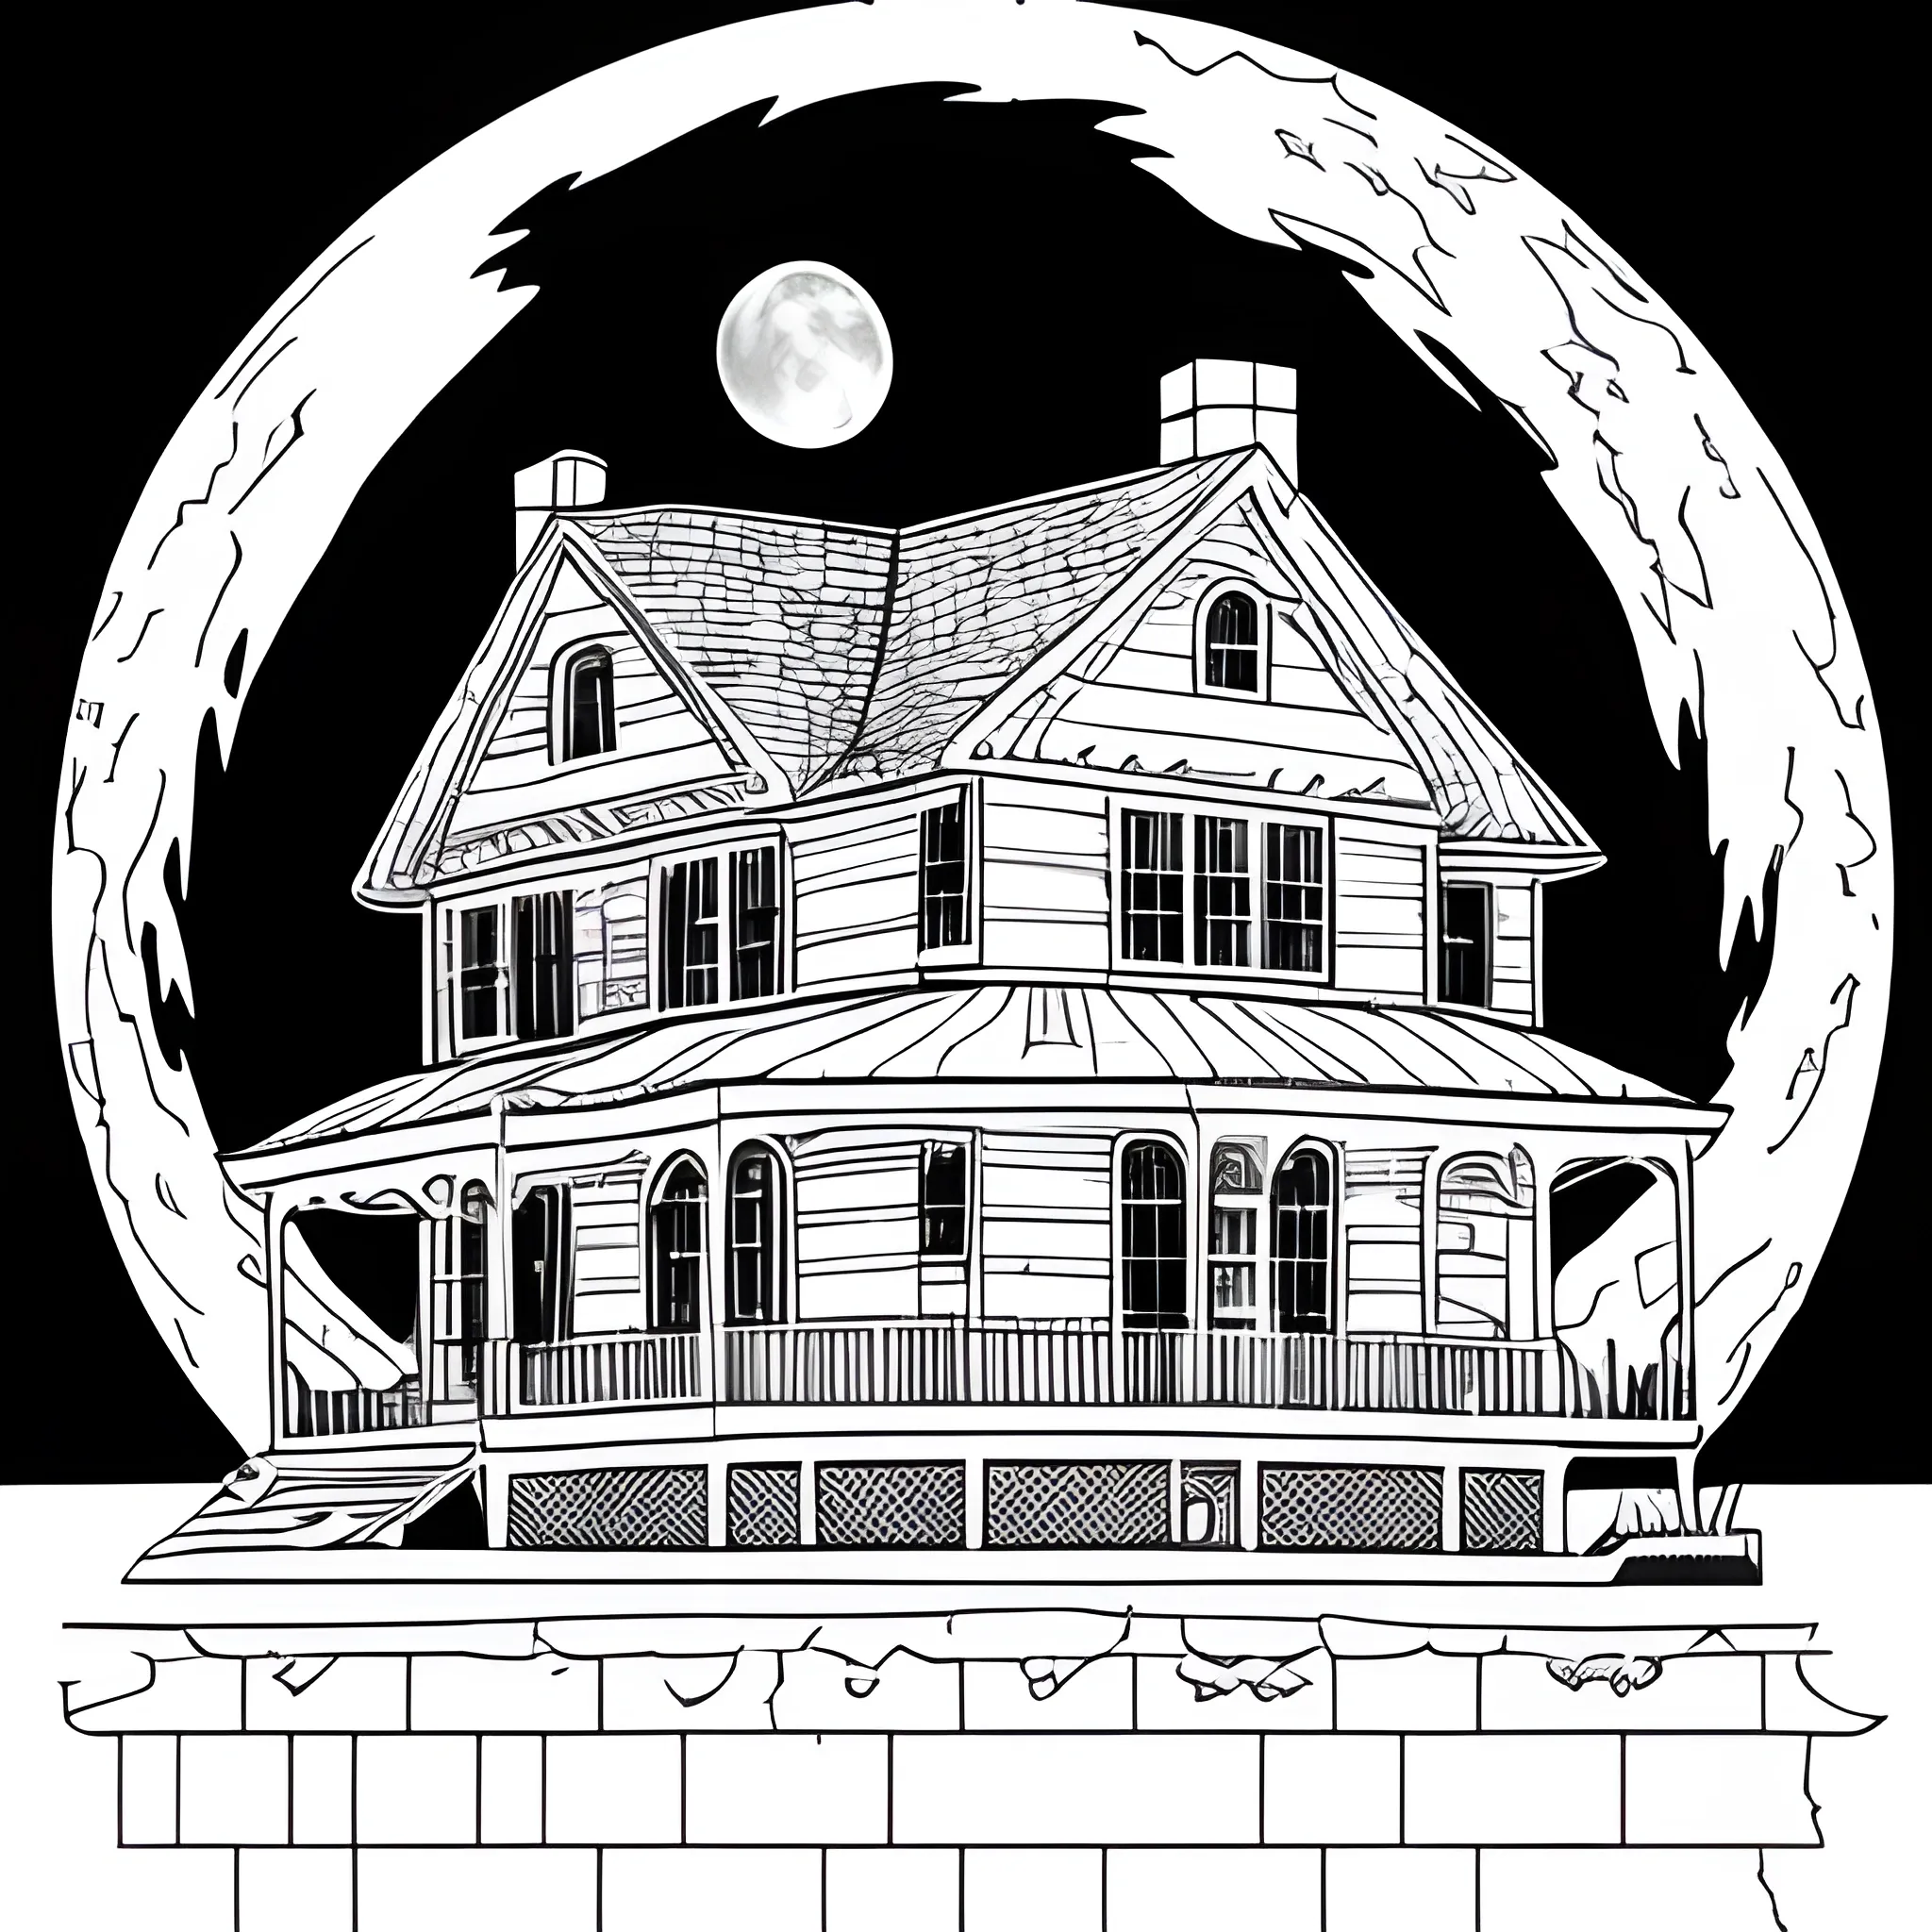 coloring book white, house in halloween, moon, only lines, white background page, no color planes
